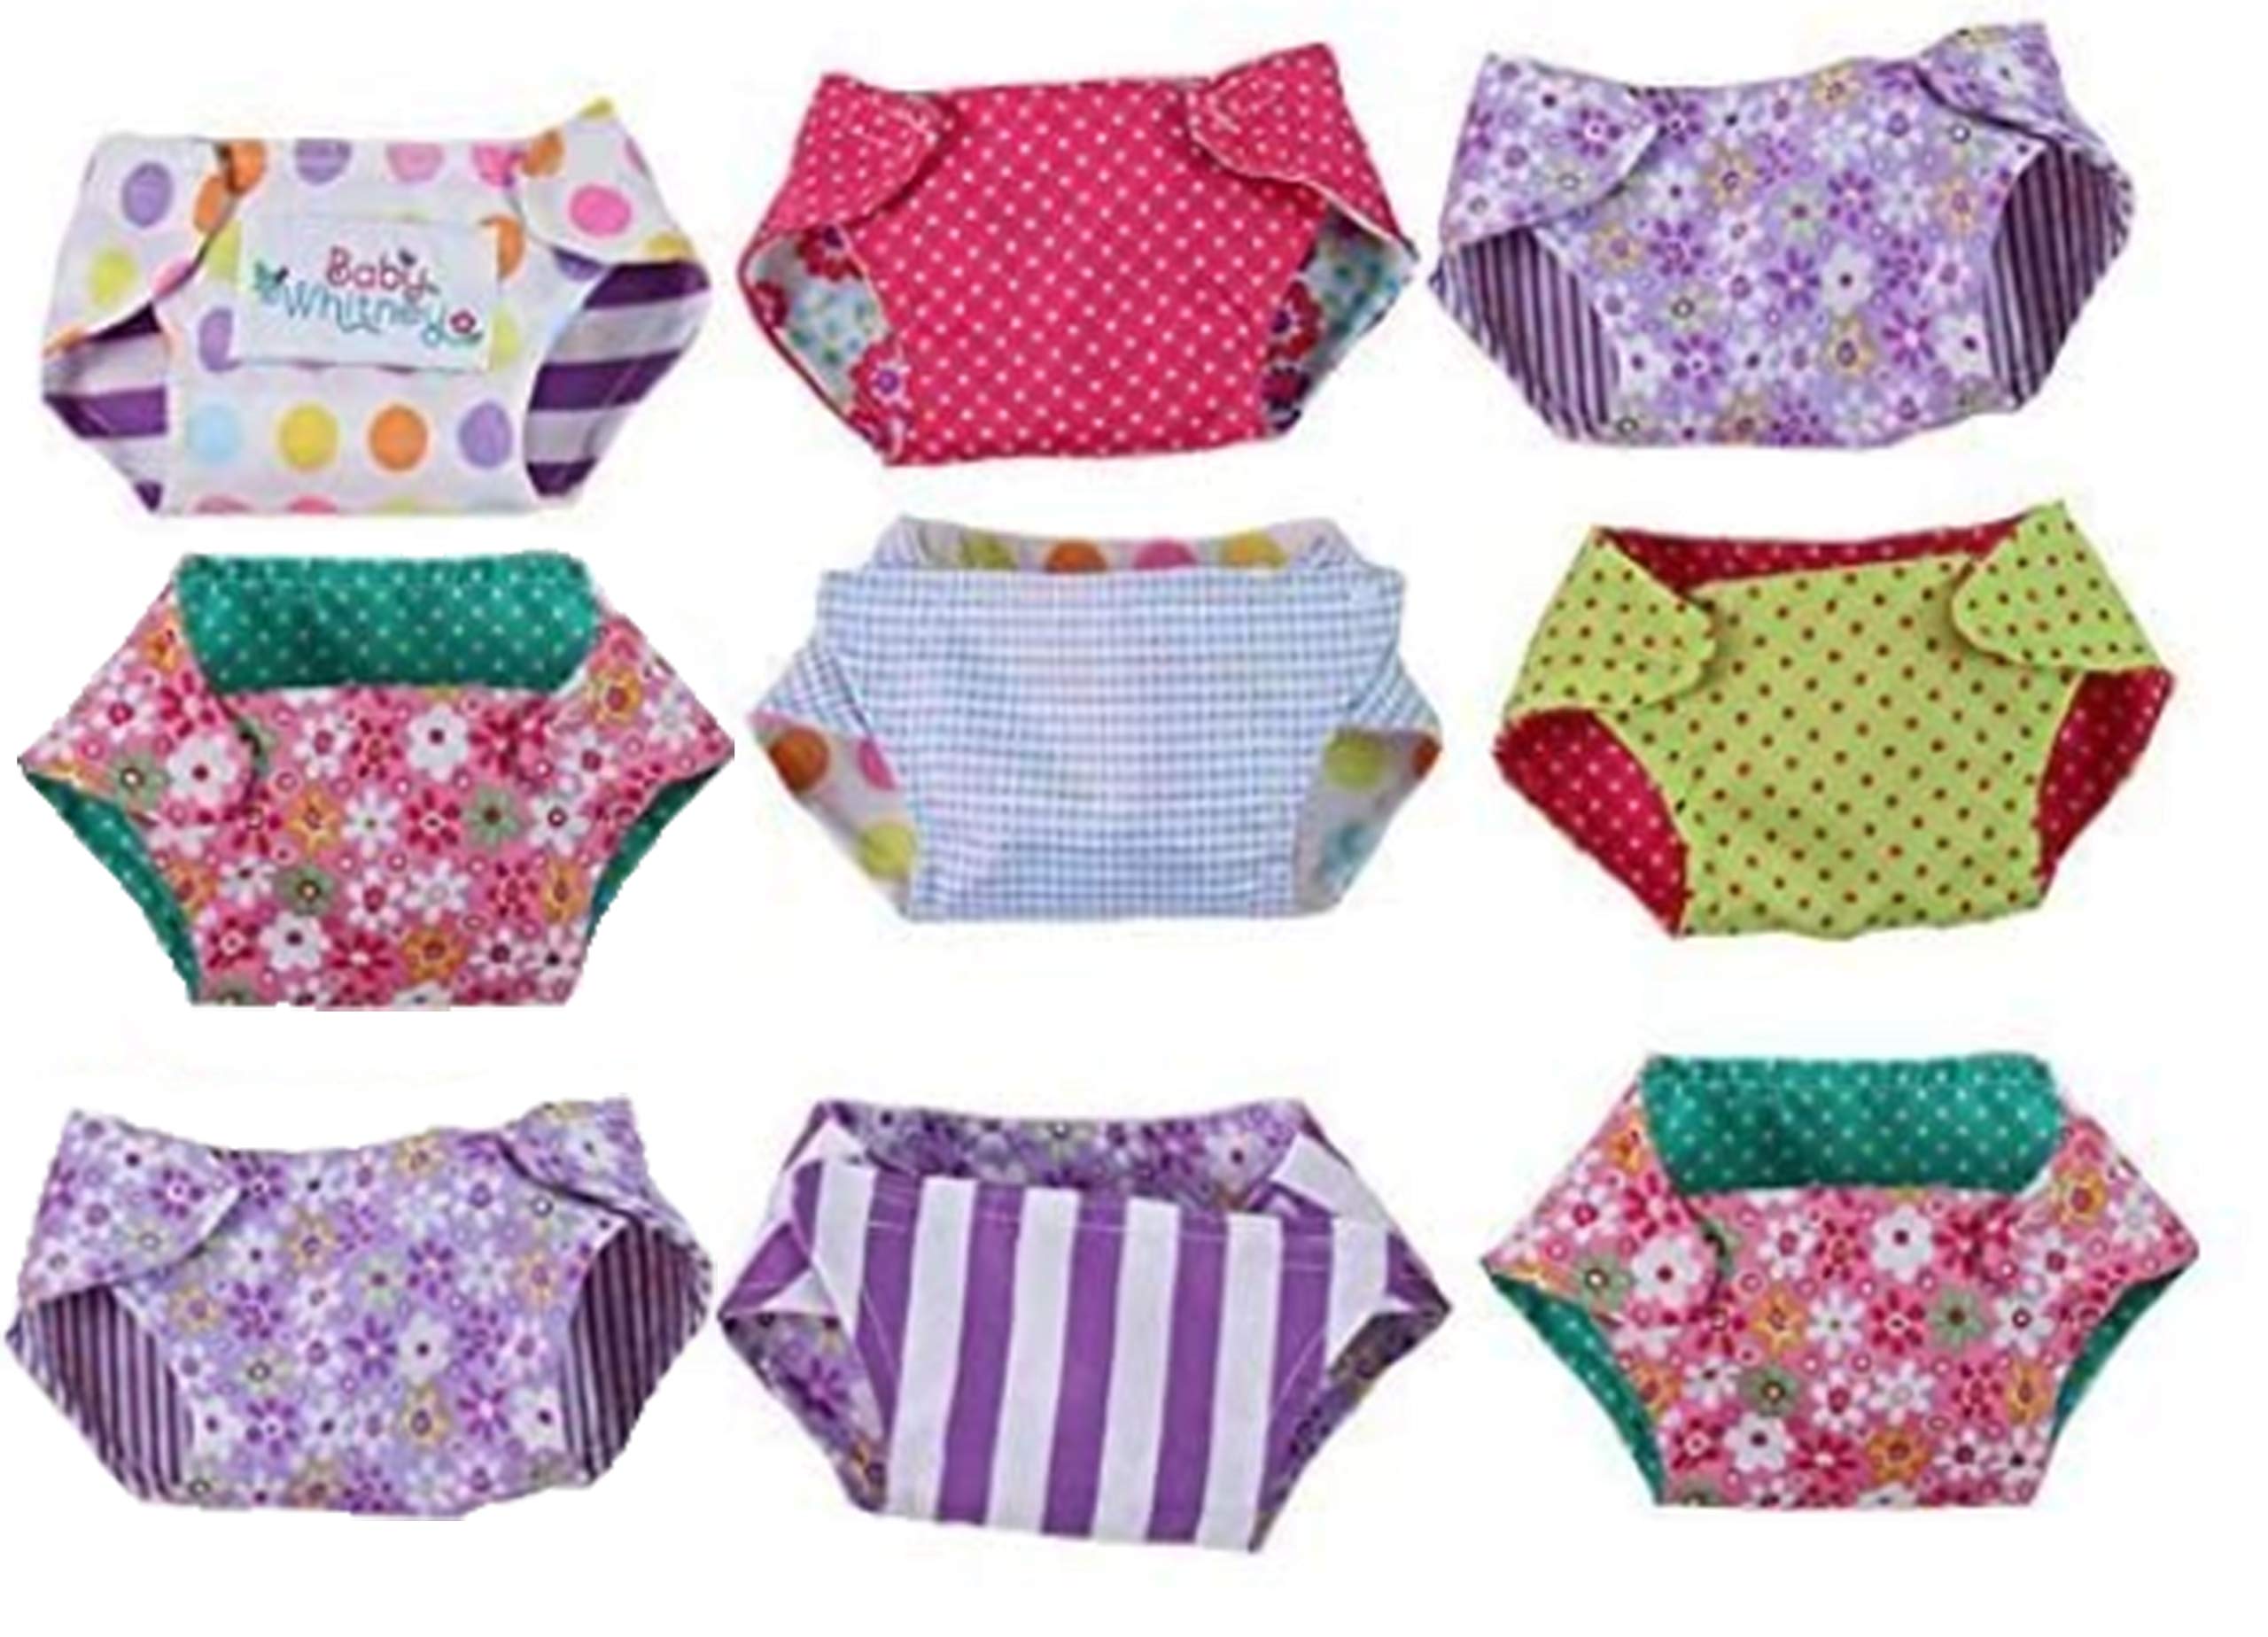 Baby Whitney Reversible Baby Doll 9-Pack Cloth Diaper Set, Assorted | Baby Doll Diapers Set, Doll Diapers, Pretend Diapers, Baby Dolls Diaper